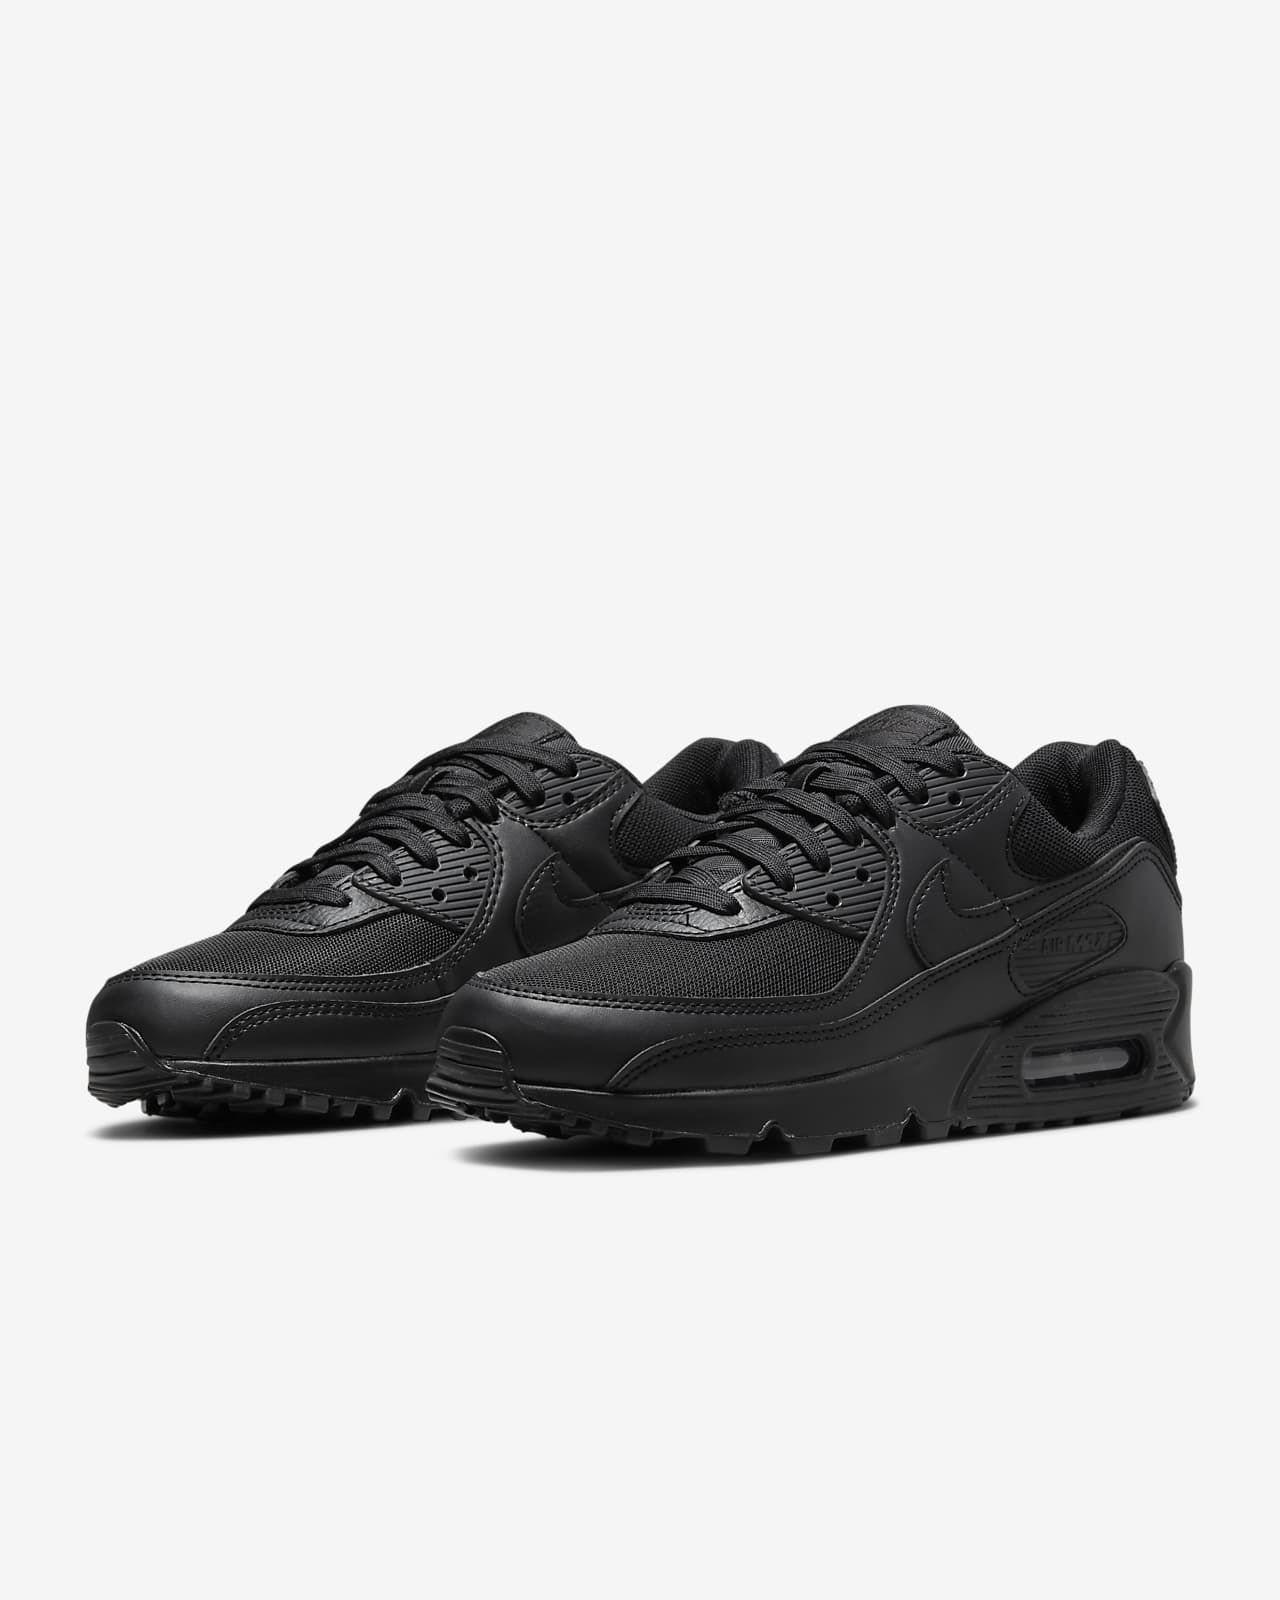 Lui Sovjet viering Chaussures Nike Air Max 90 pour Femme. Nike CA